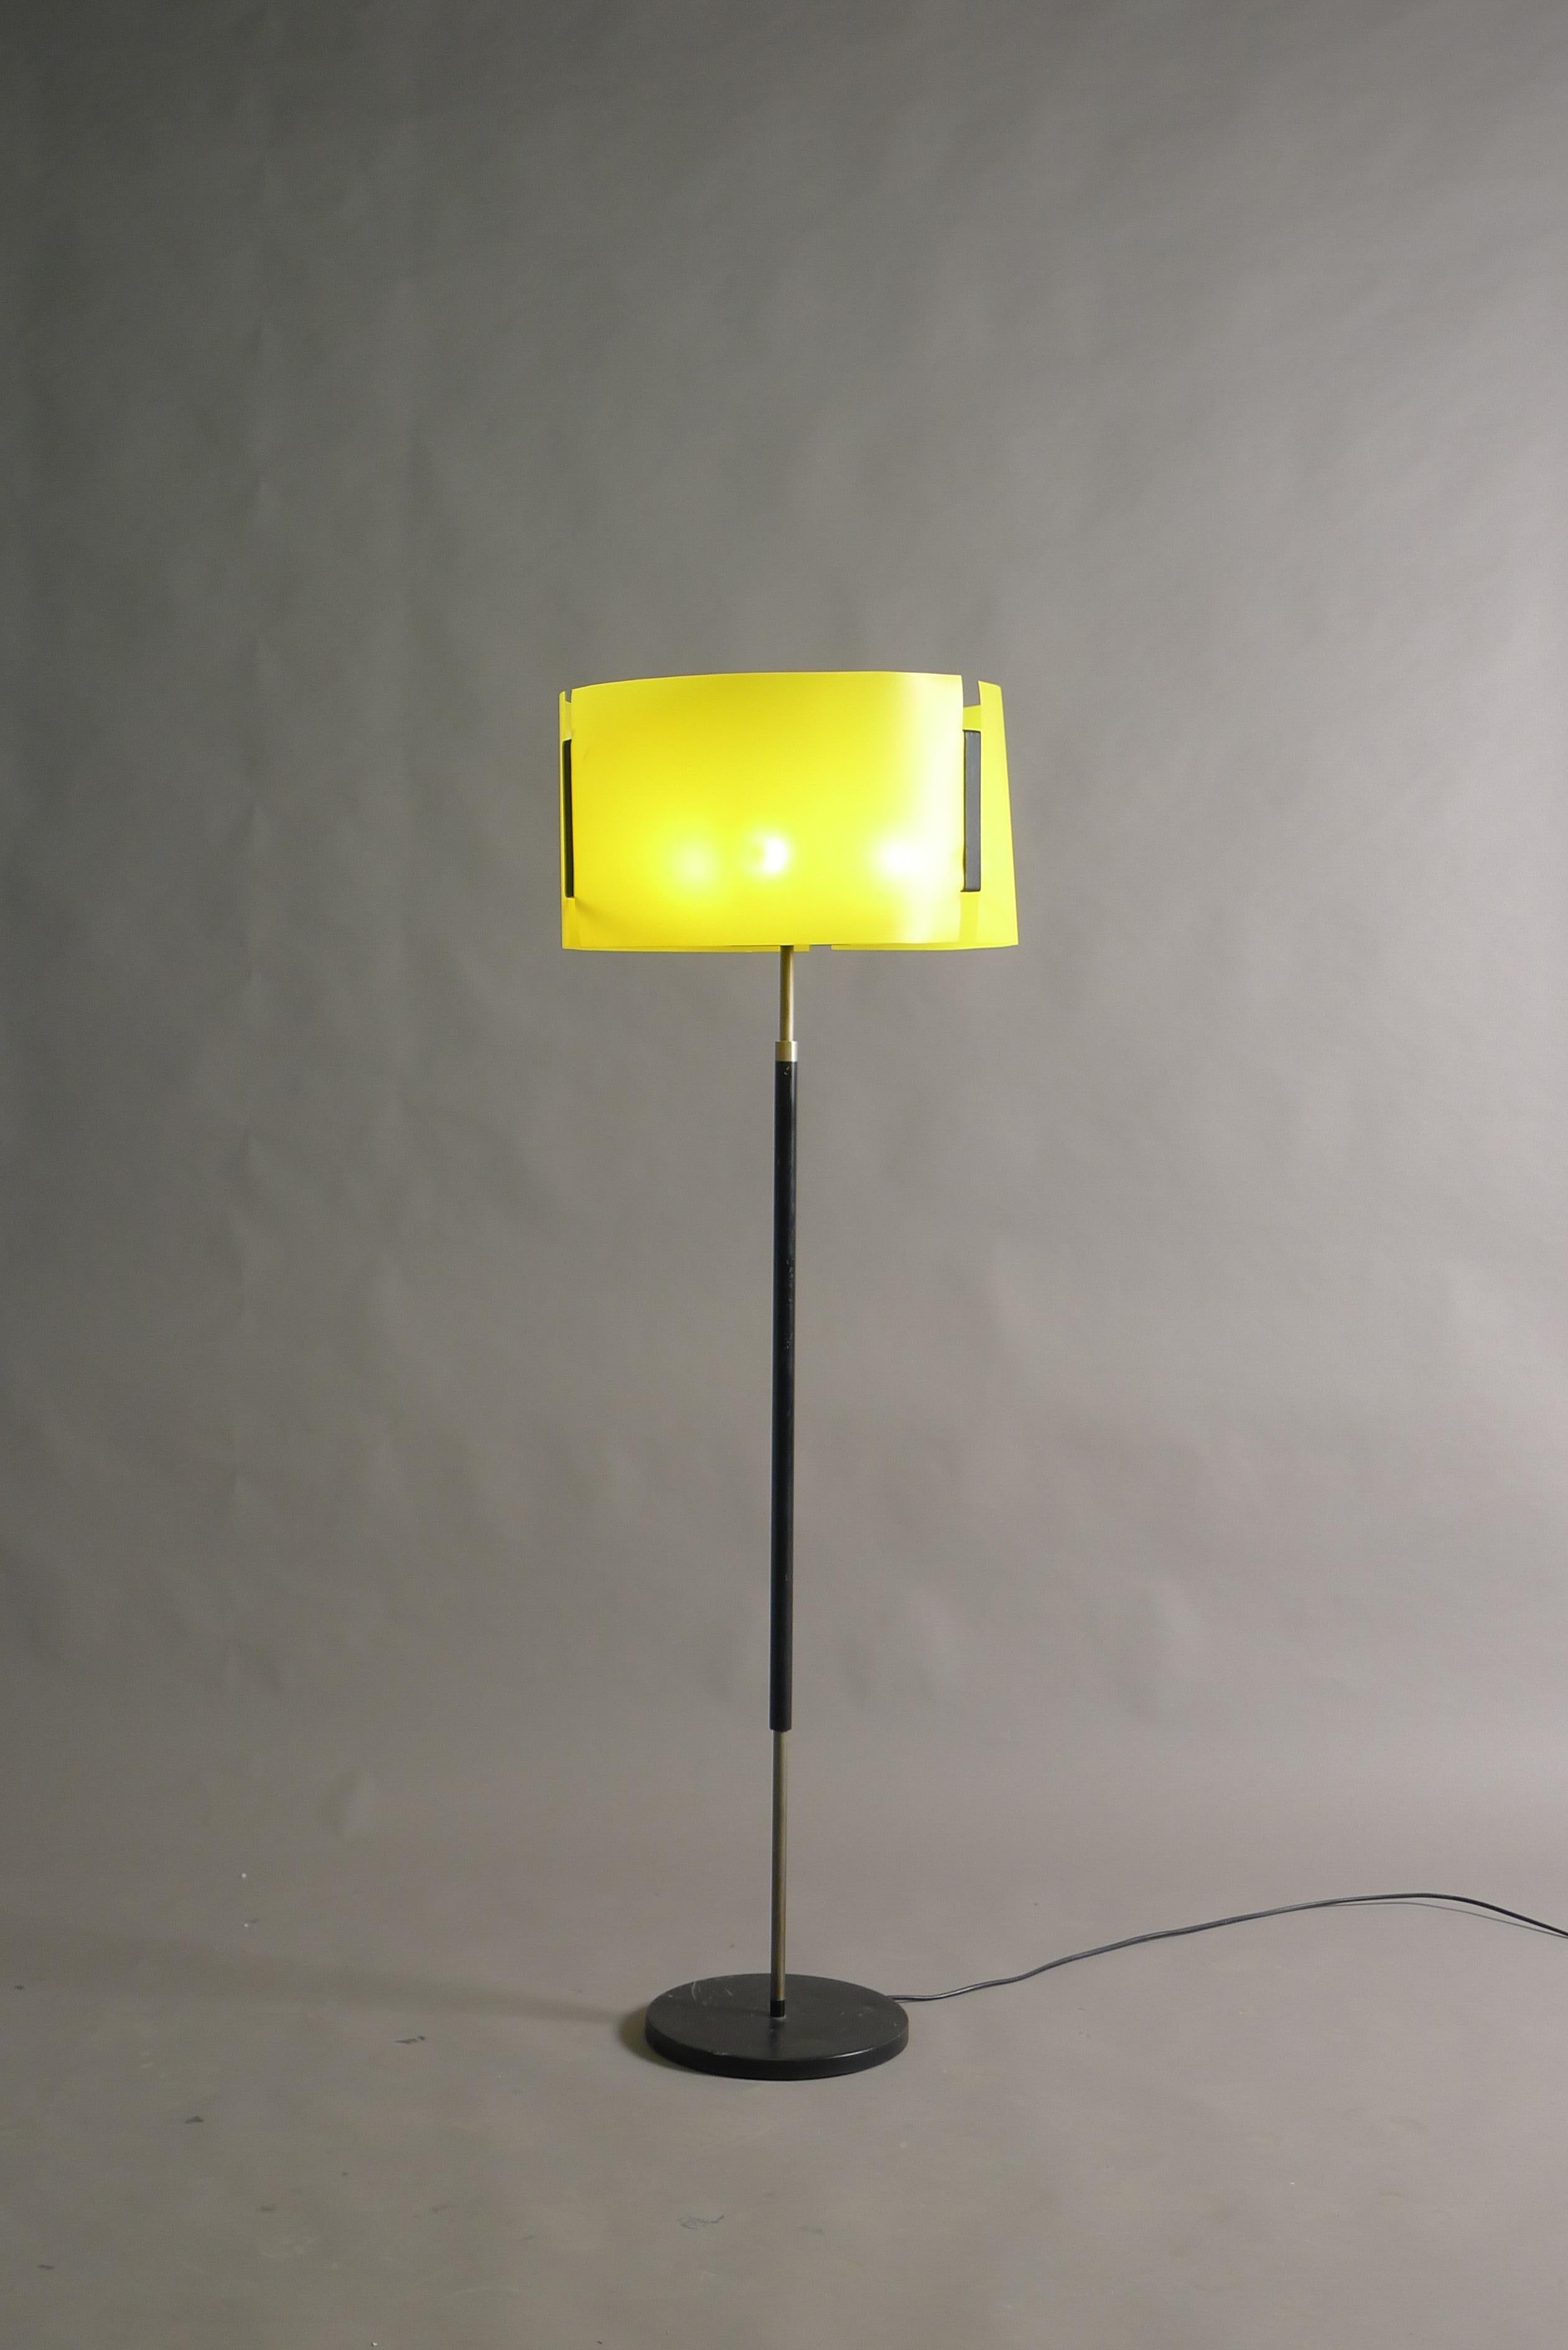 Giuseppe Ostuni for Oluce, Italy circa 1960. A floor lamp with enamelled metal black base, stem supporting black metal framework with yellow flexi shade. Inside there are 3 vertical light sources and a central uplighter, these are switched